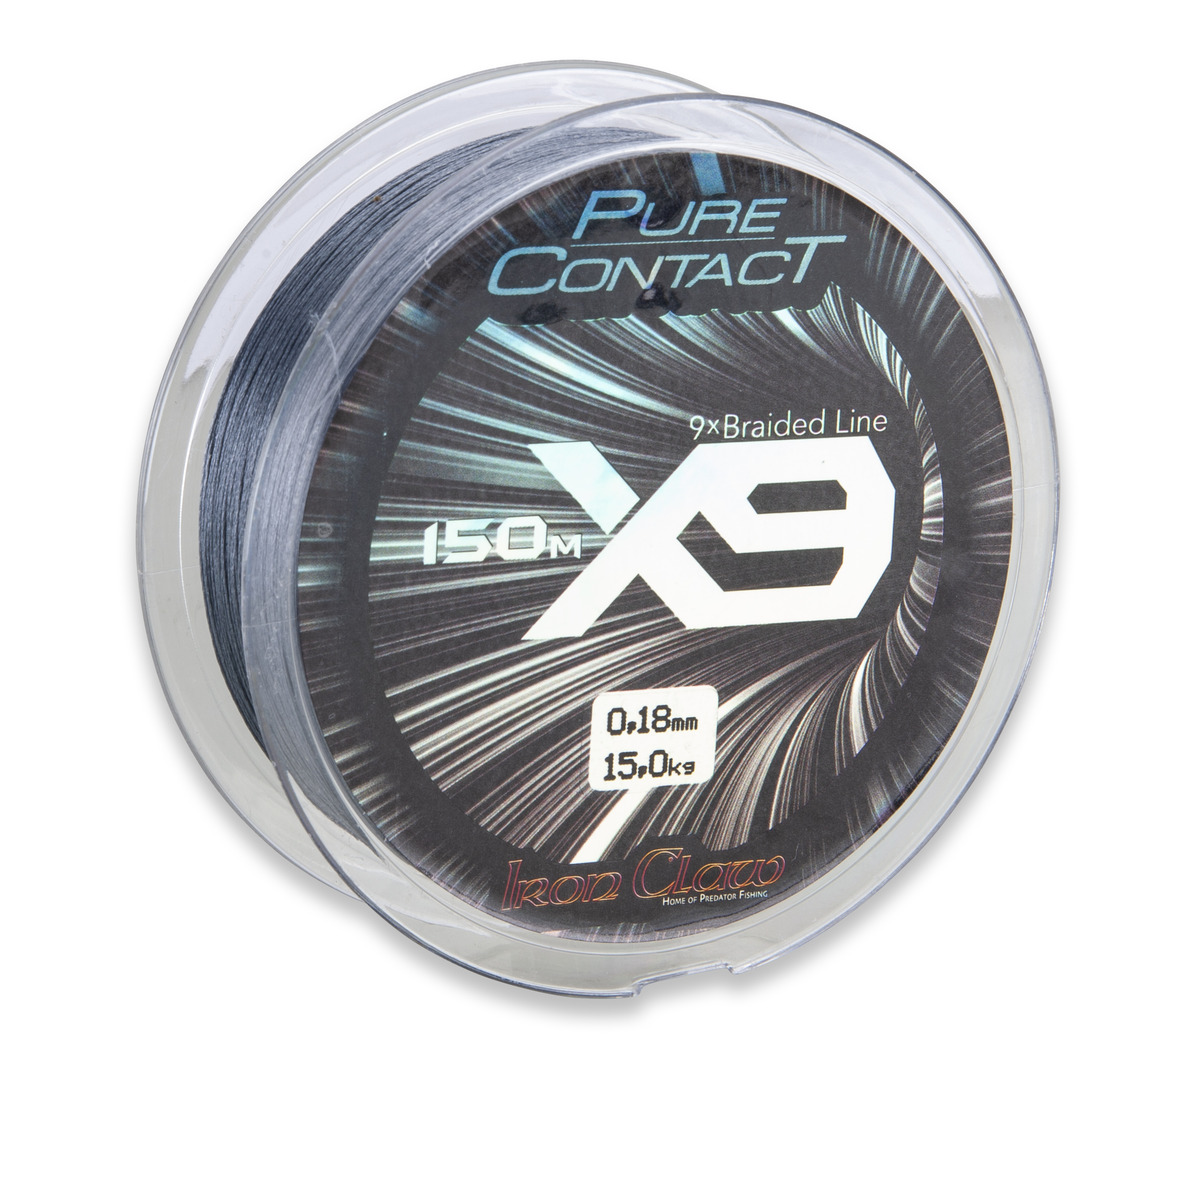 Iron Claw Pure Contact X9 Grey - 1500 m 0.24 mm